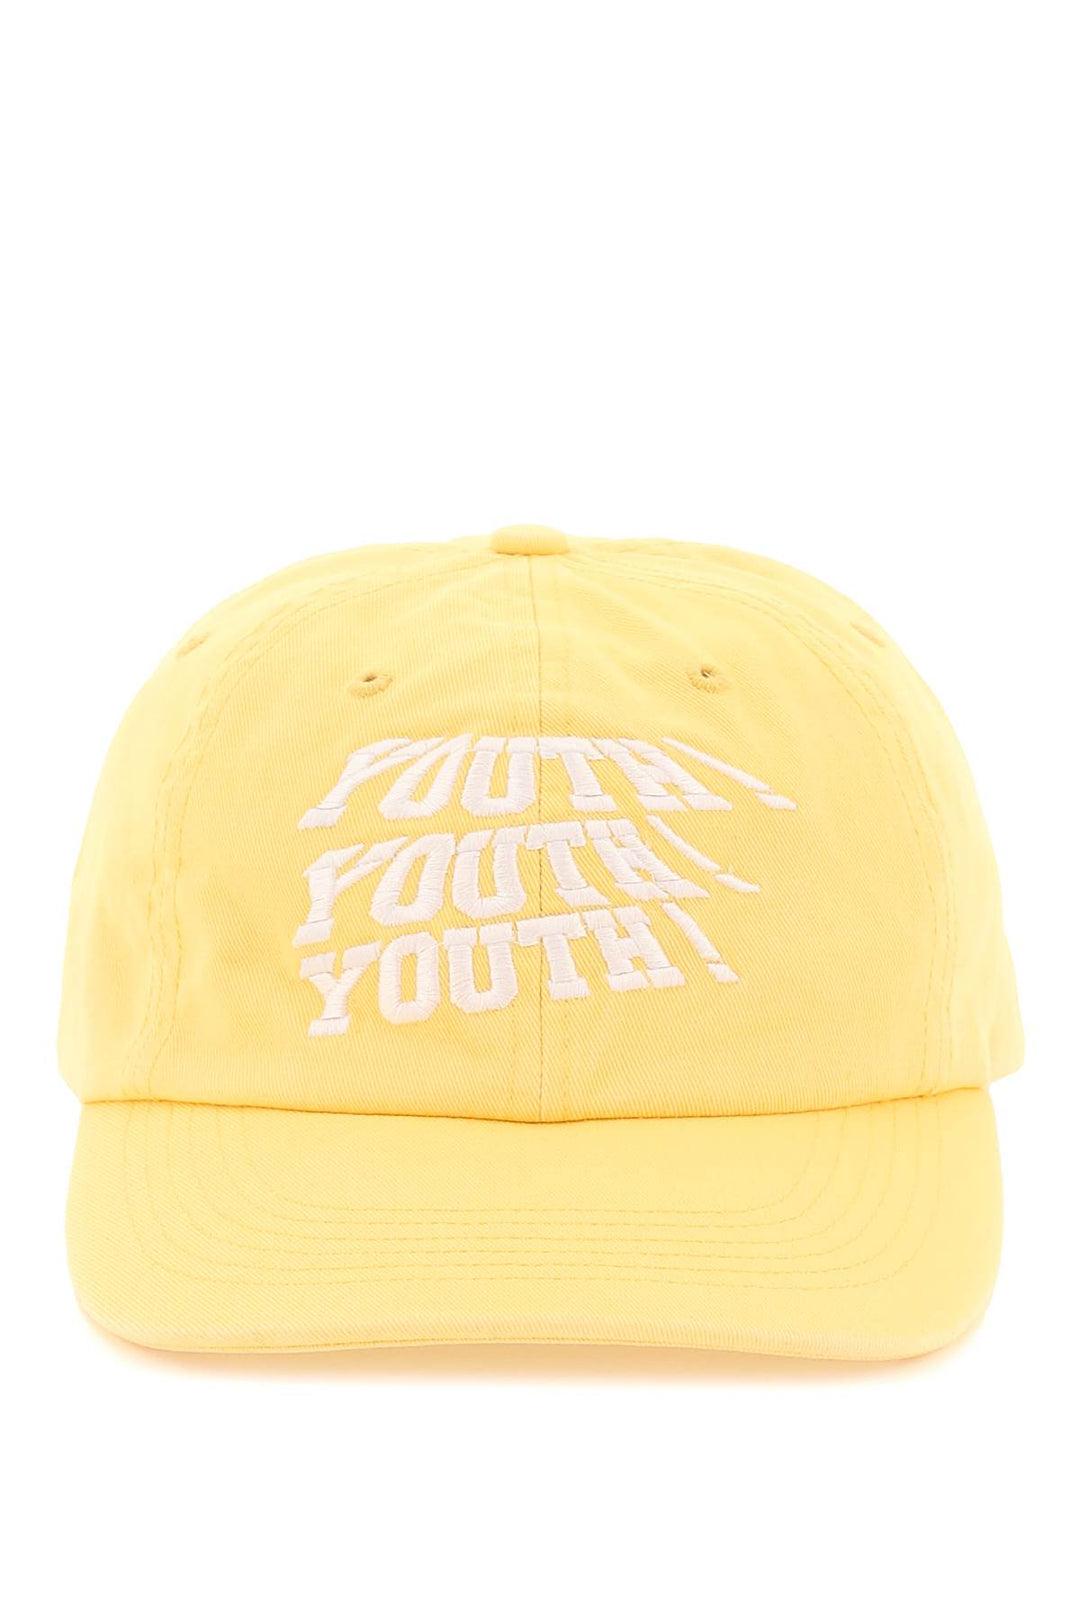 Liberal youth ministry cotton baseball cap-0